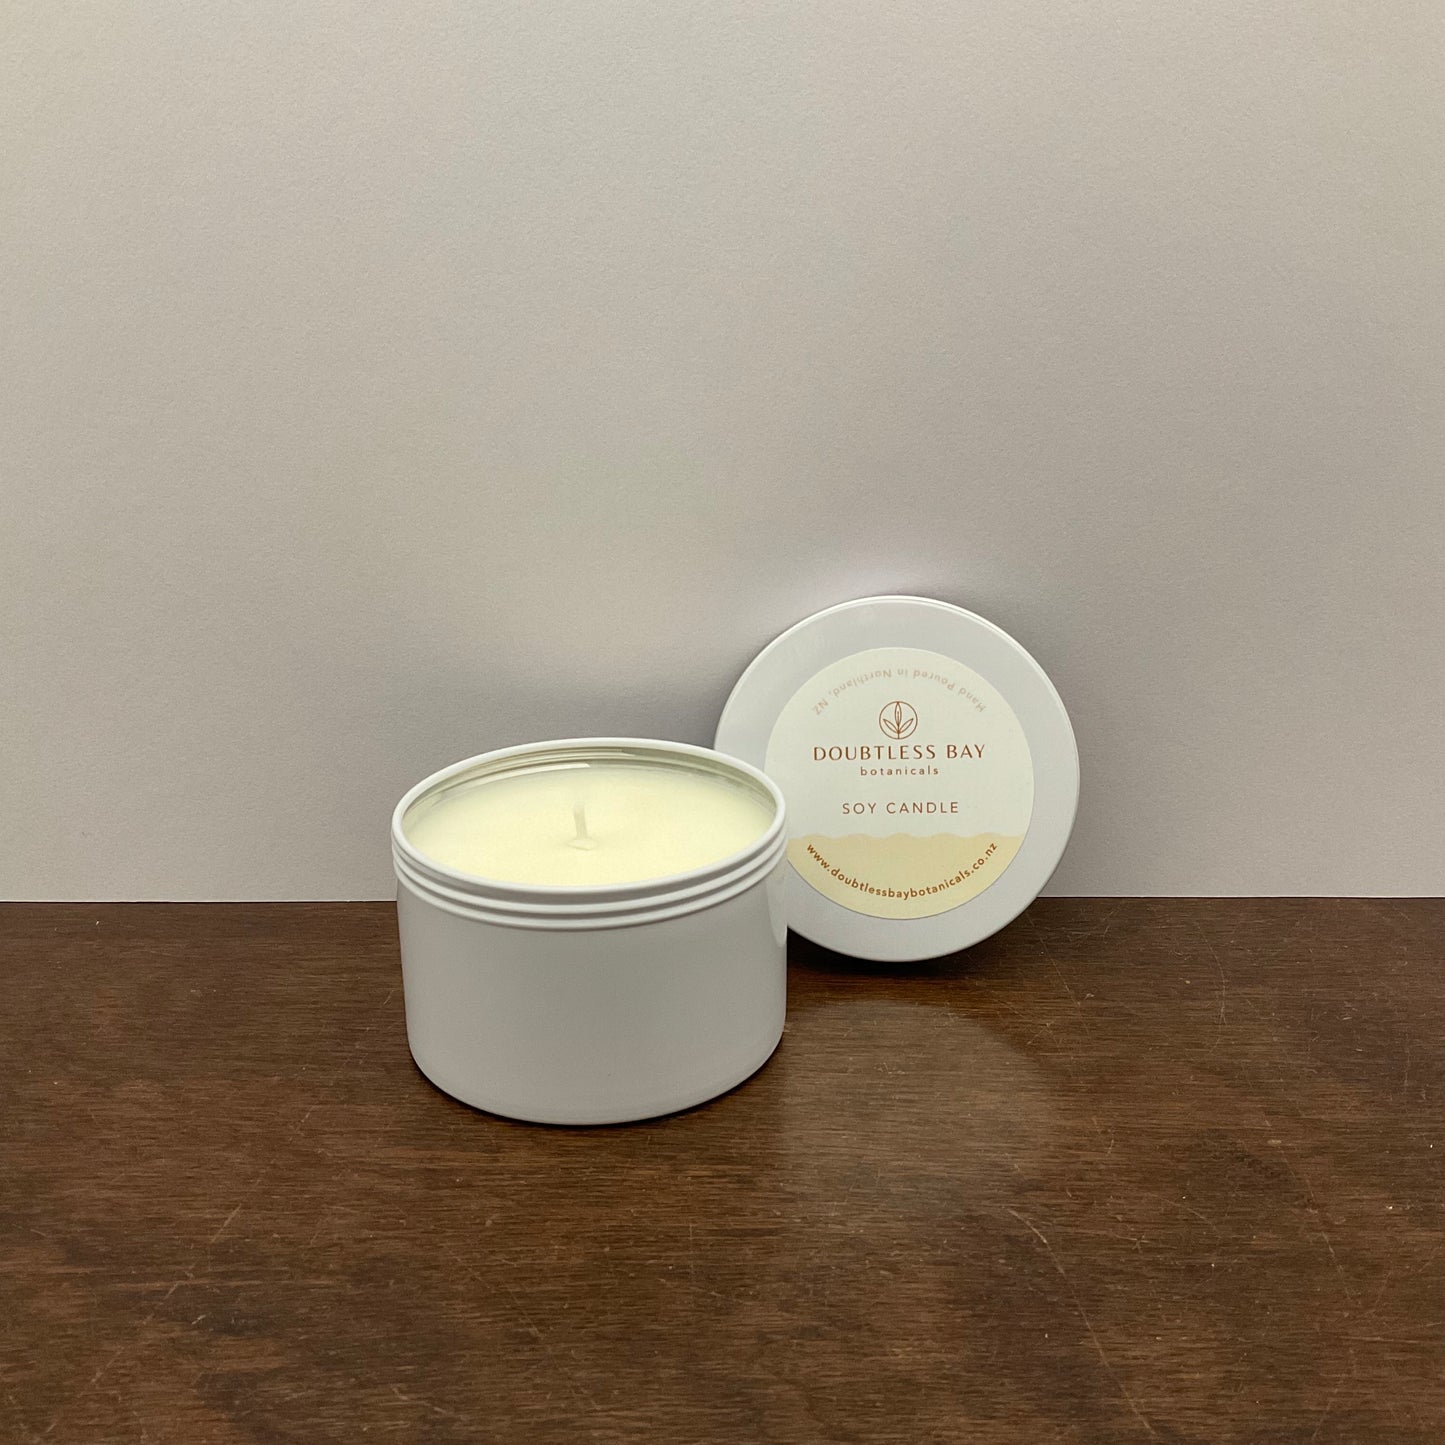 Doubtless Bay Botanicals Small Candle